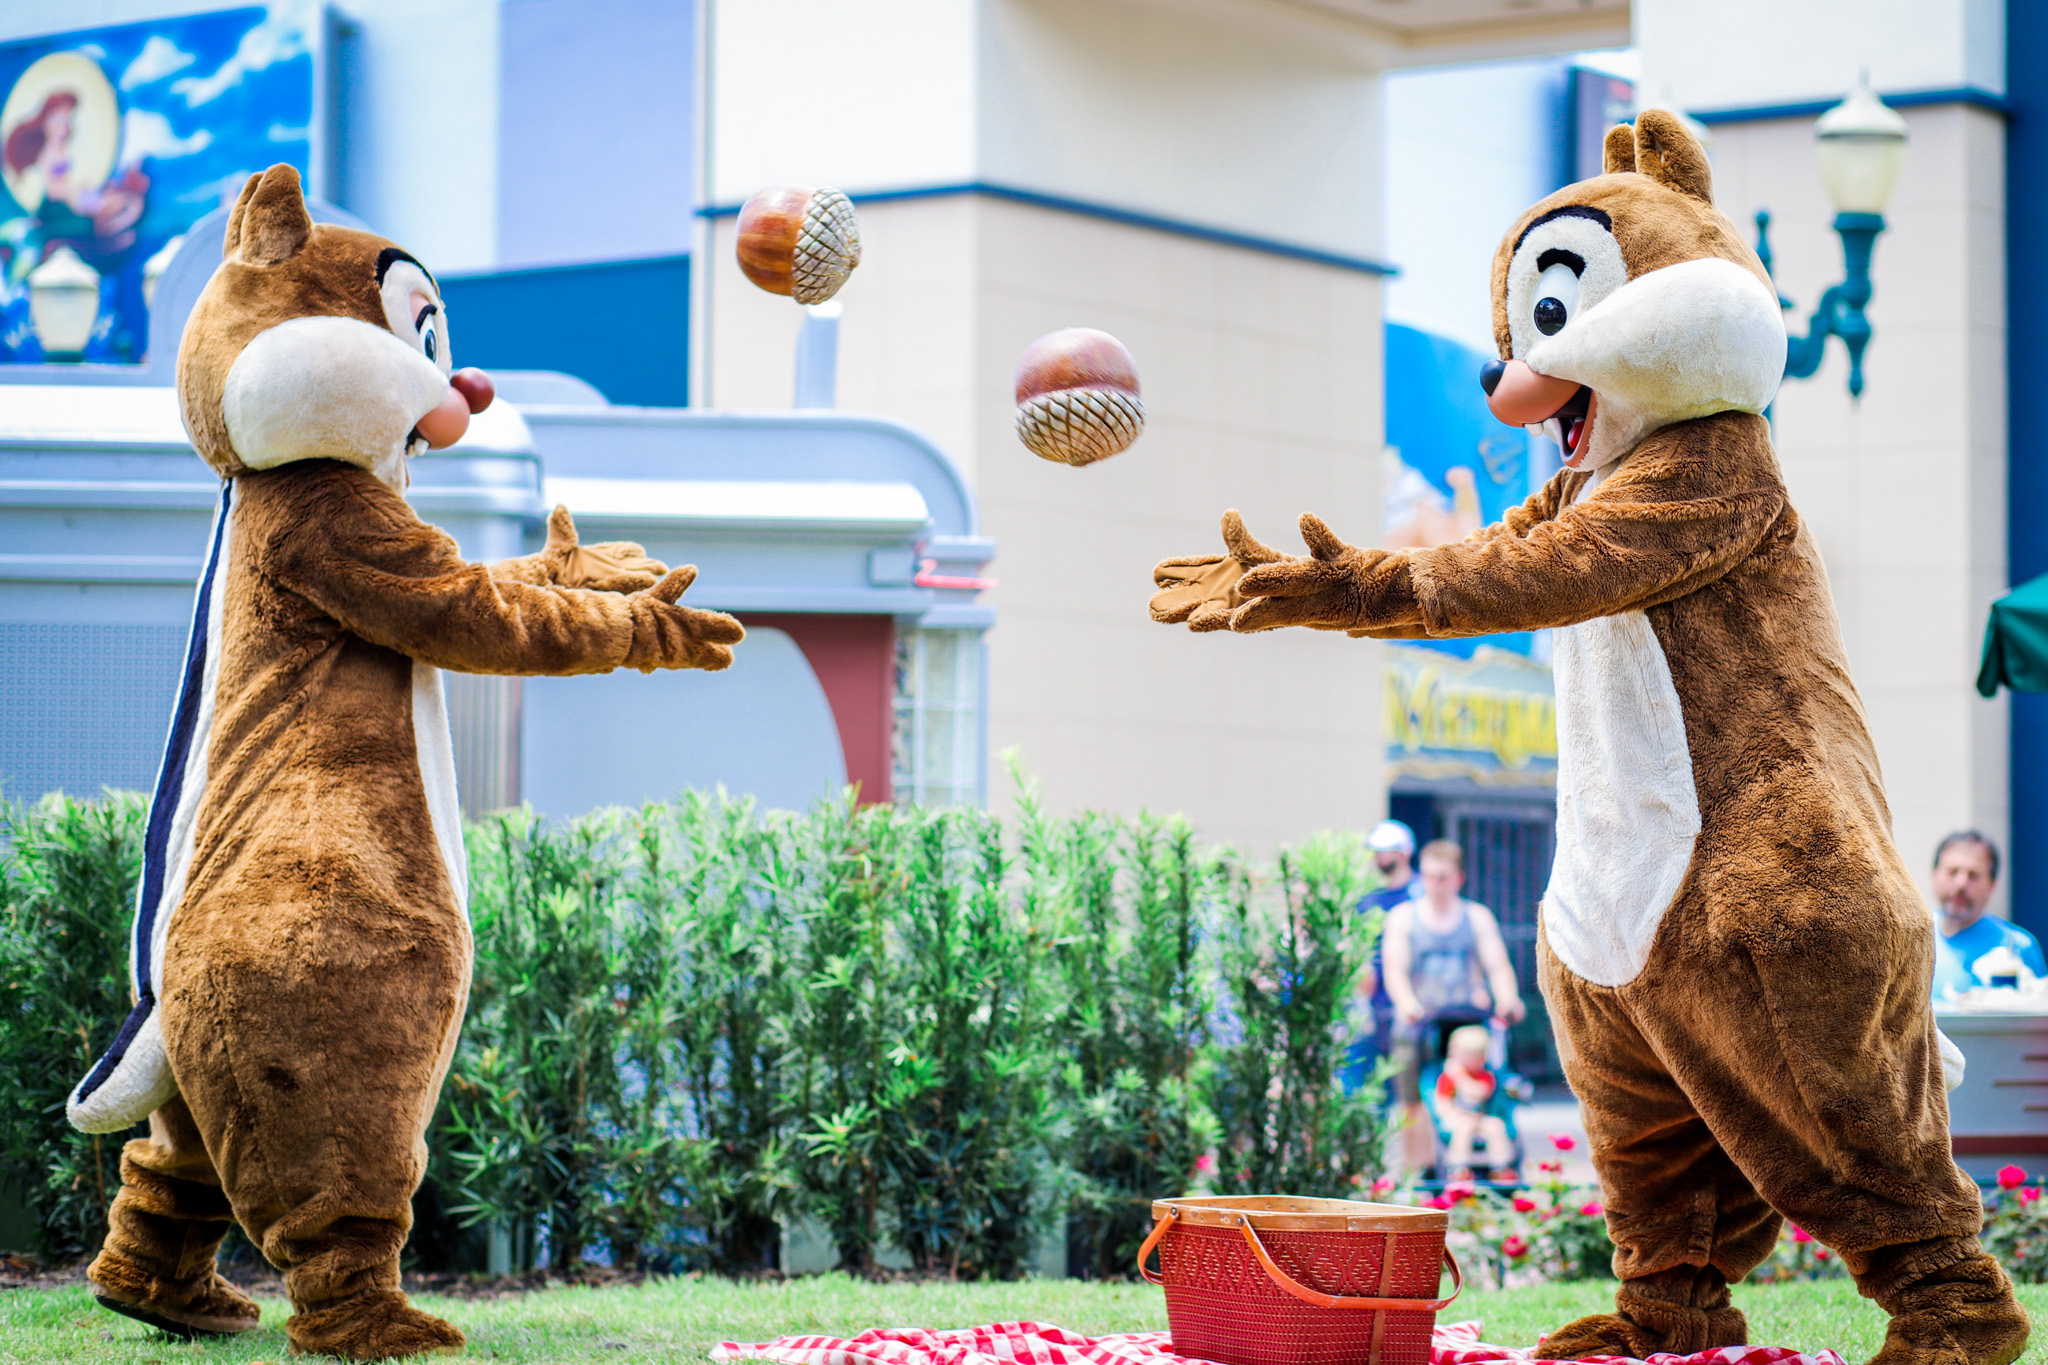 Chip & Dale playing catch with acorns